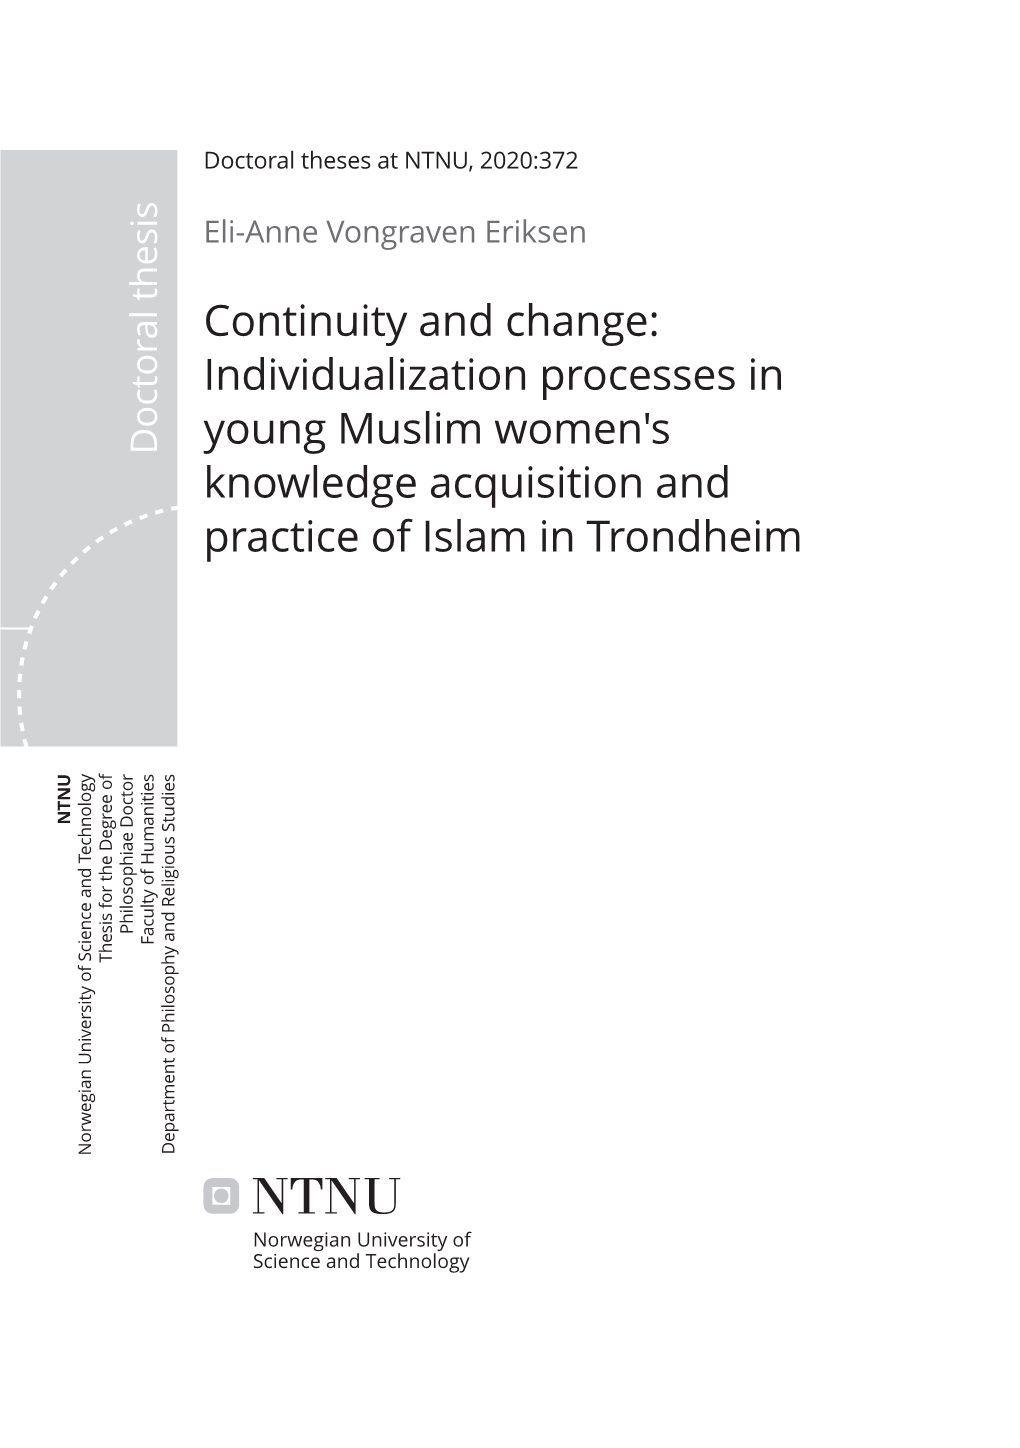 Individualization Processes in Young Muslim Women's Knowledge Acquisition and Practice of Islam in Trondheim